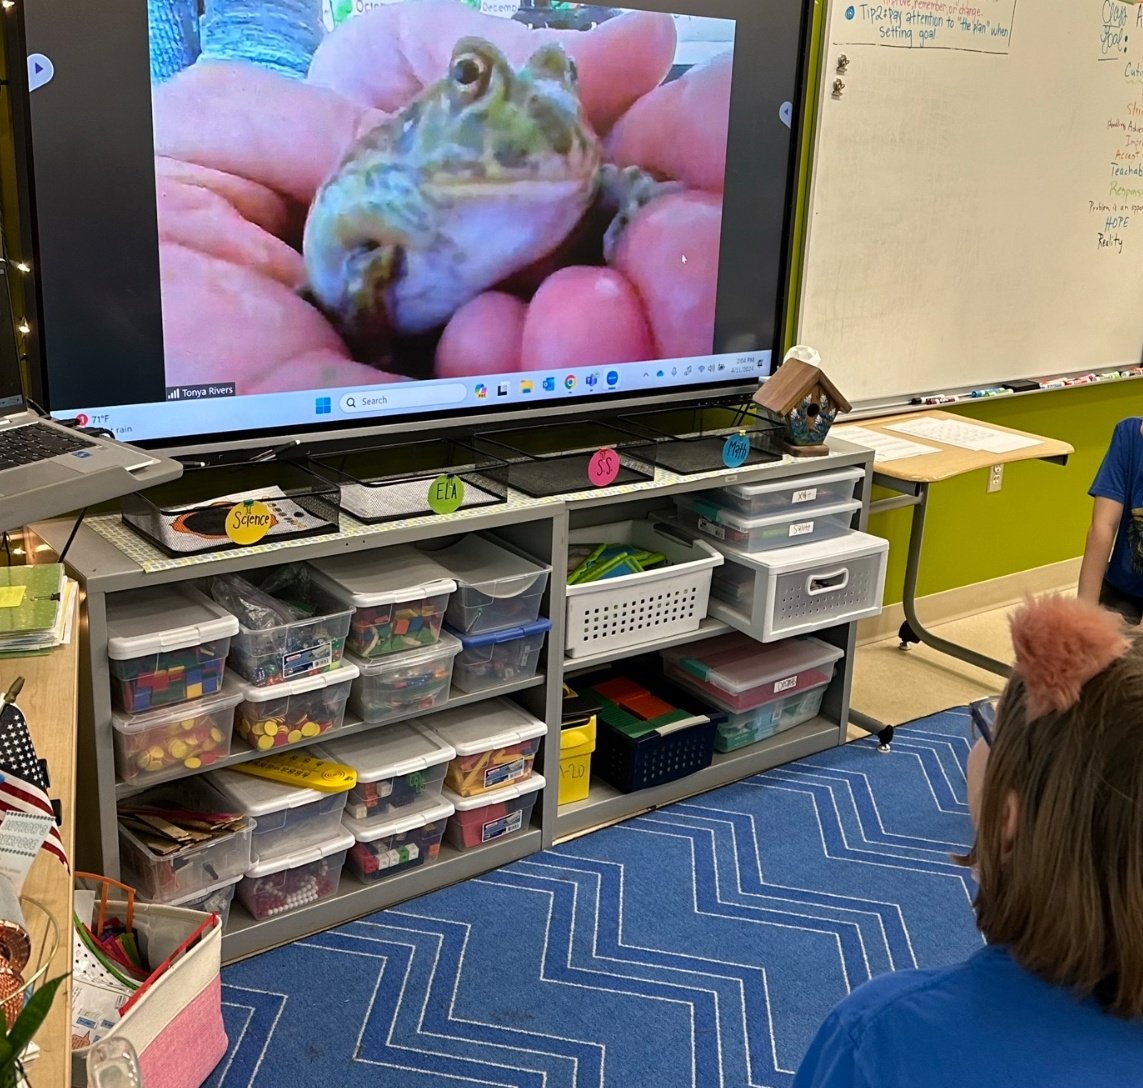 My class zoomed with Kaylee's class to show my class pets today. zoom + kindergartners = chaos 🤣 . I'm sure the 4th graders enjoyed the antics.